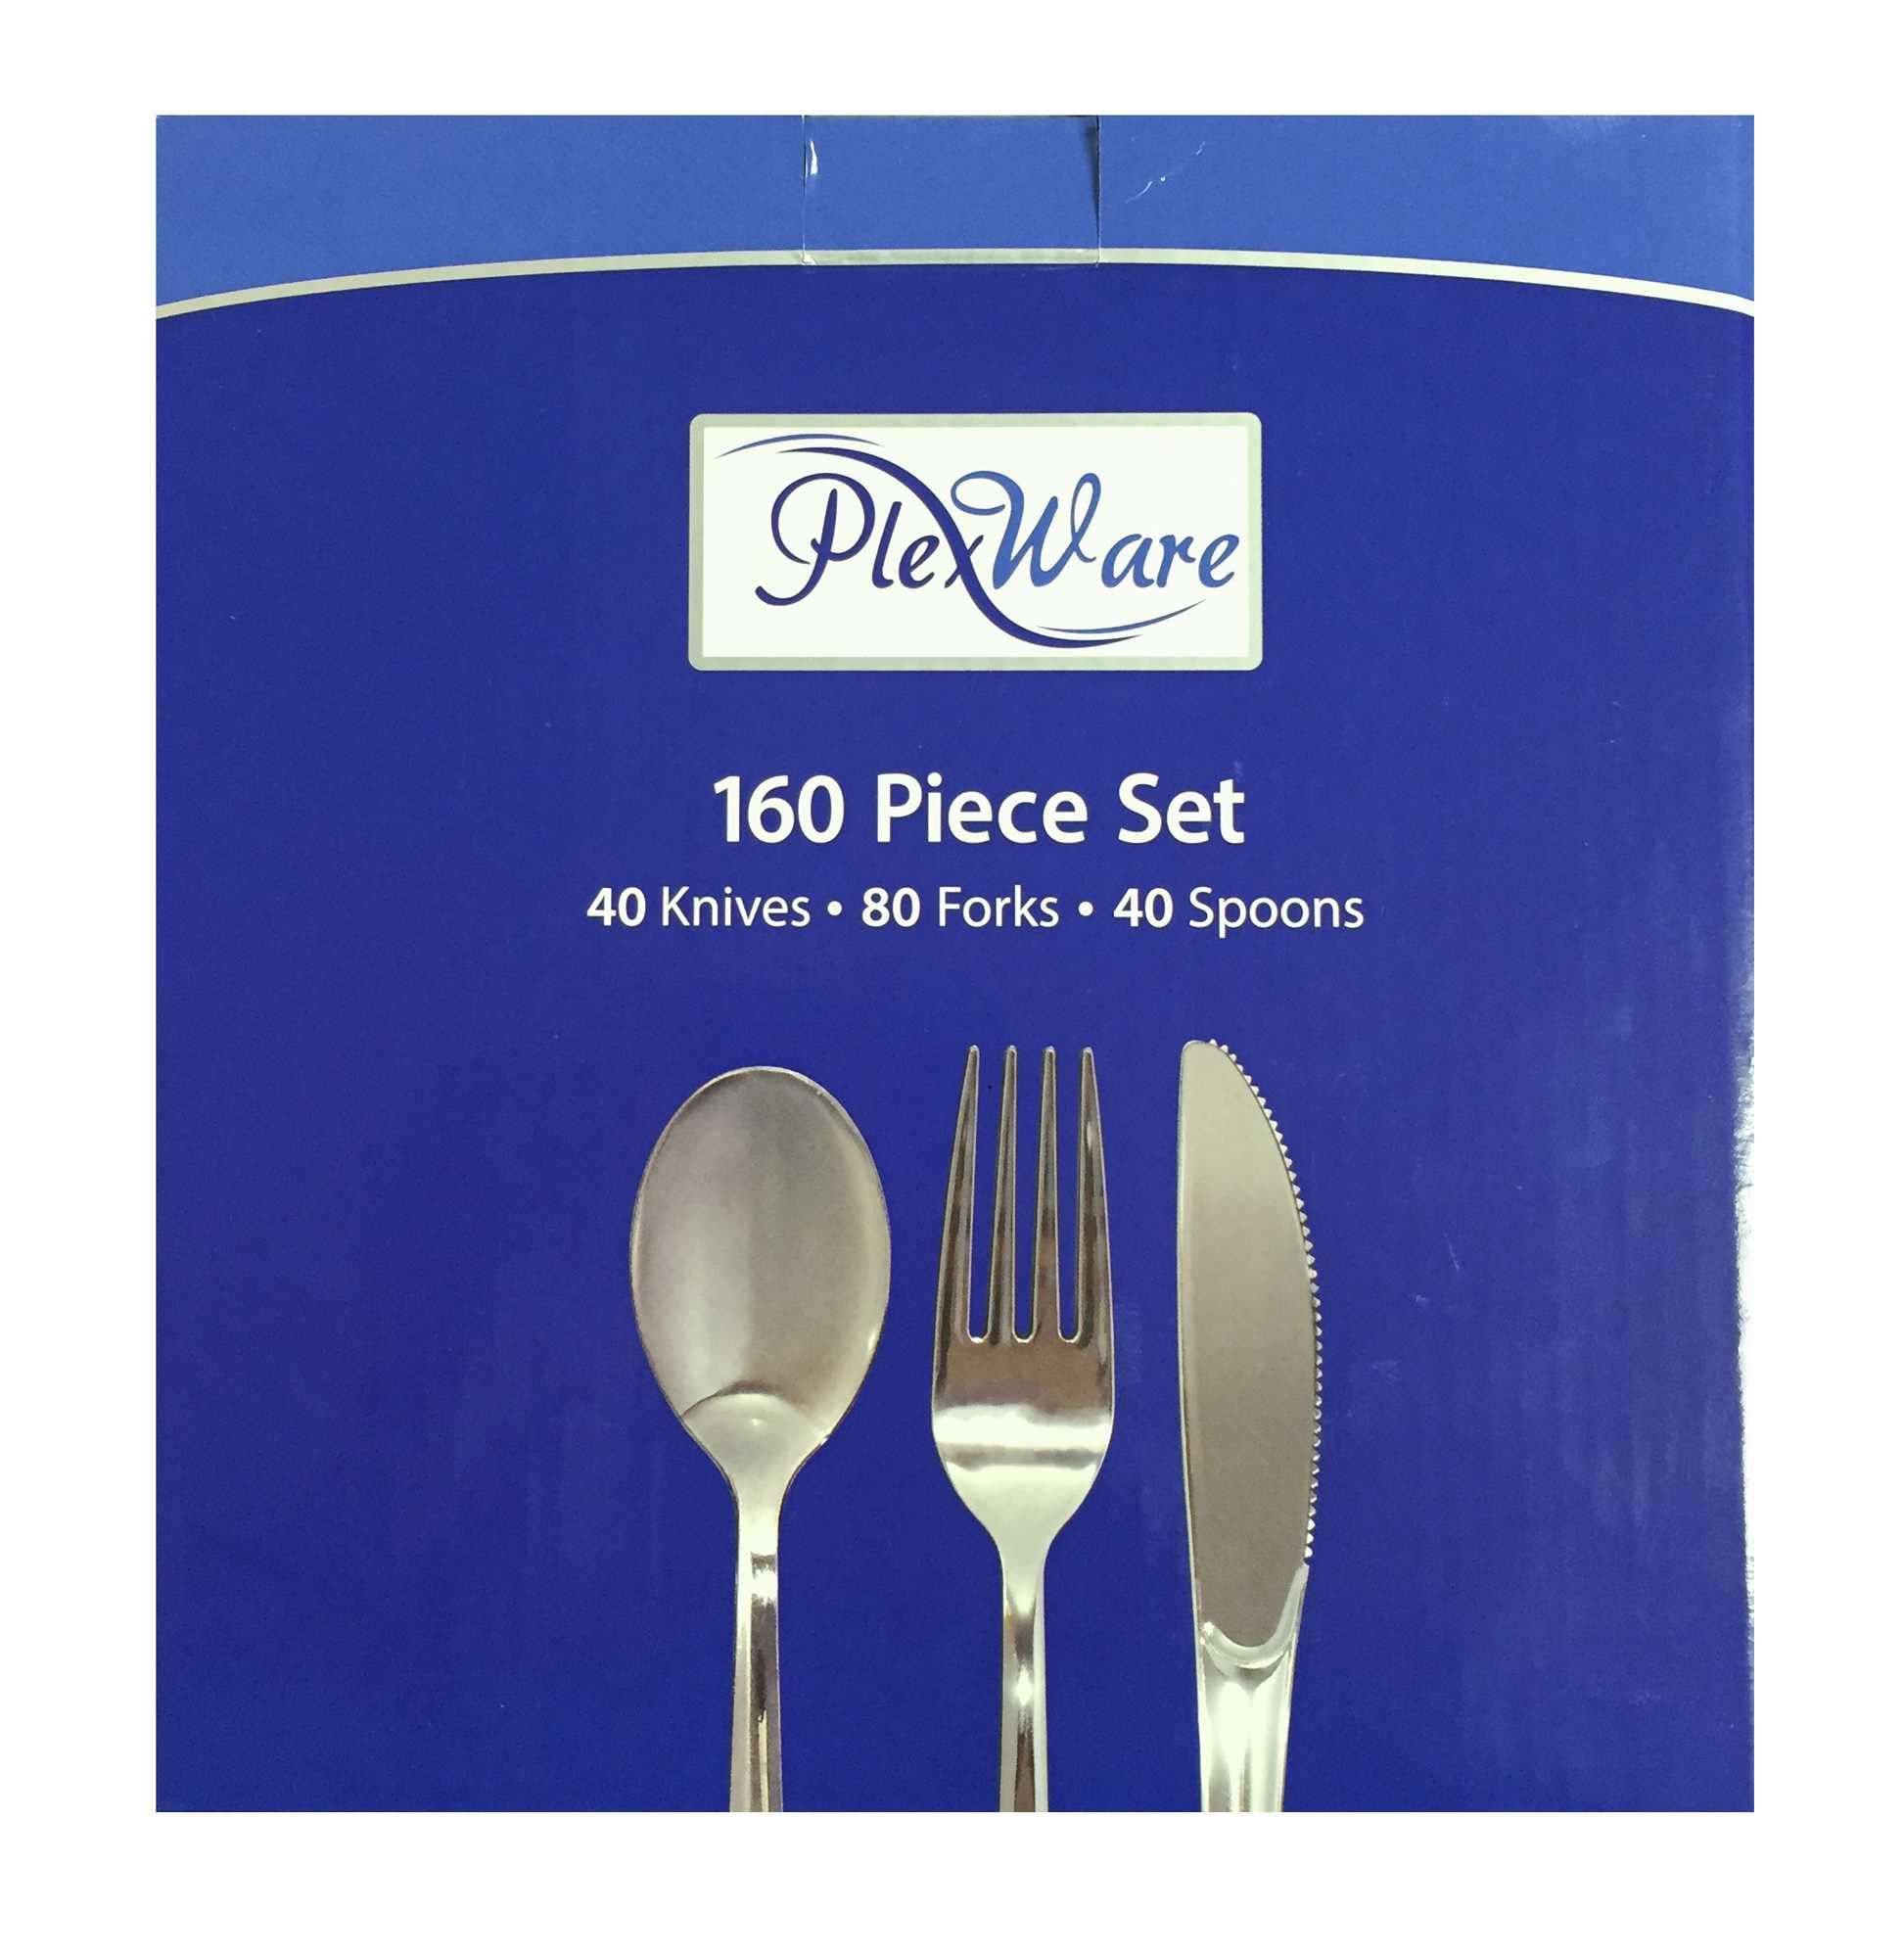 160-piece Premium Plastic Silver Cutlery Set, 40 Knives, 80 Forks, 40 Spoons, 12/Case - 2